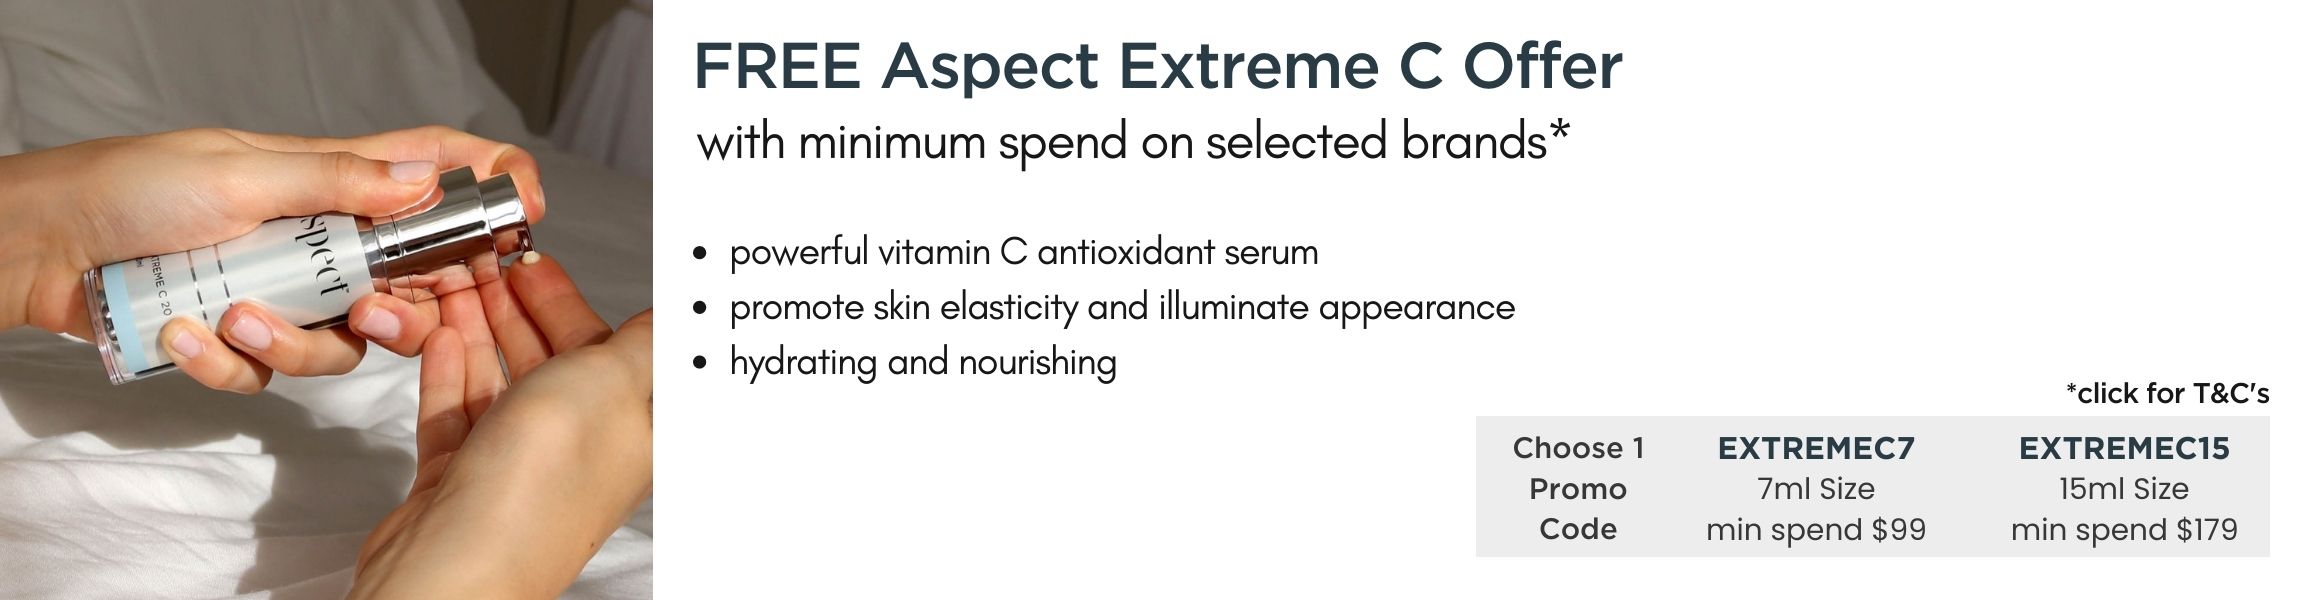 FREE Aspect Extreme C20 7ml or 15ml Trial size with minimum spend on selected brands